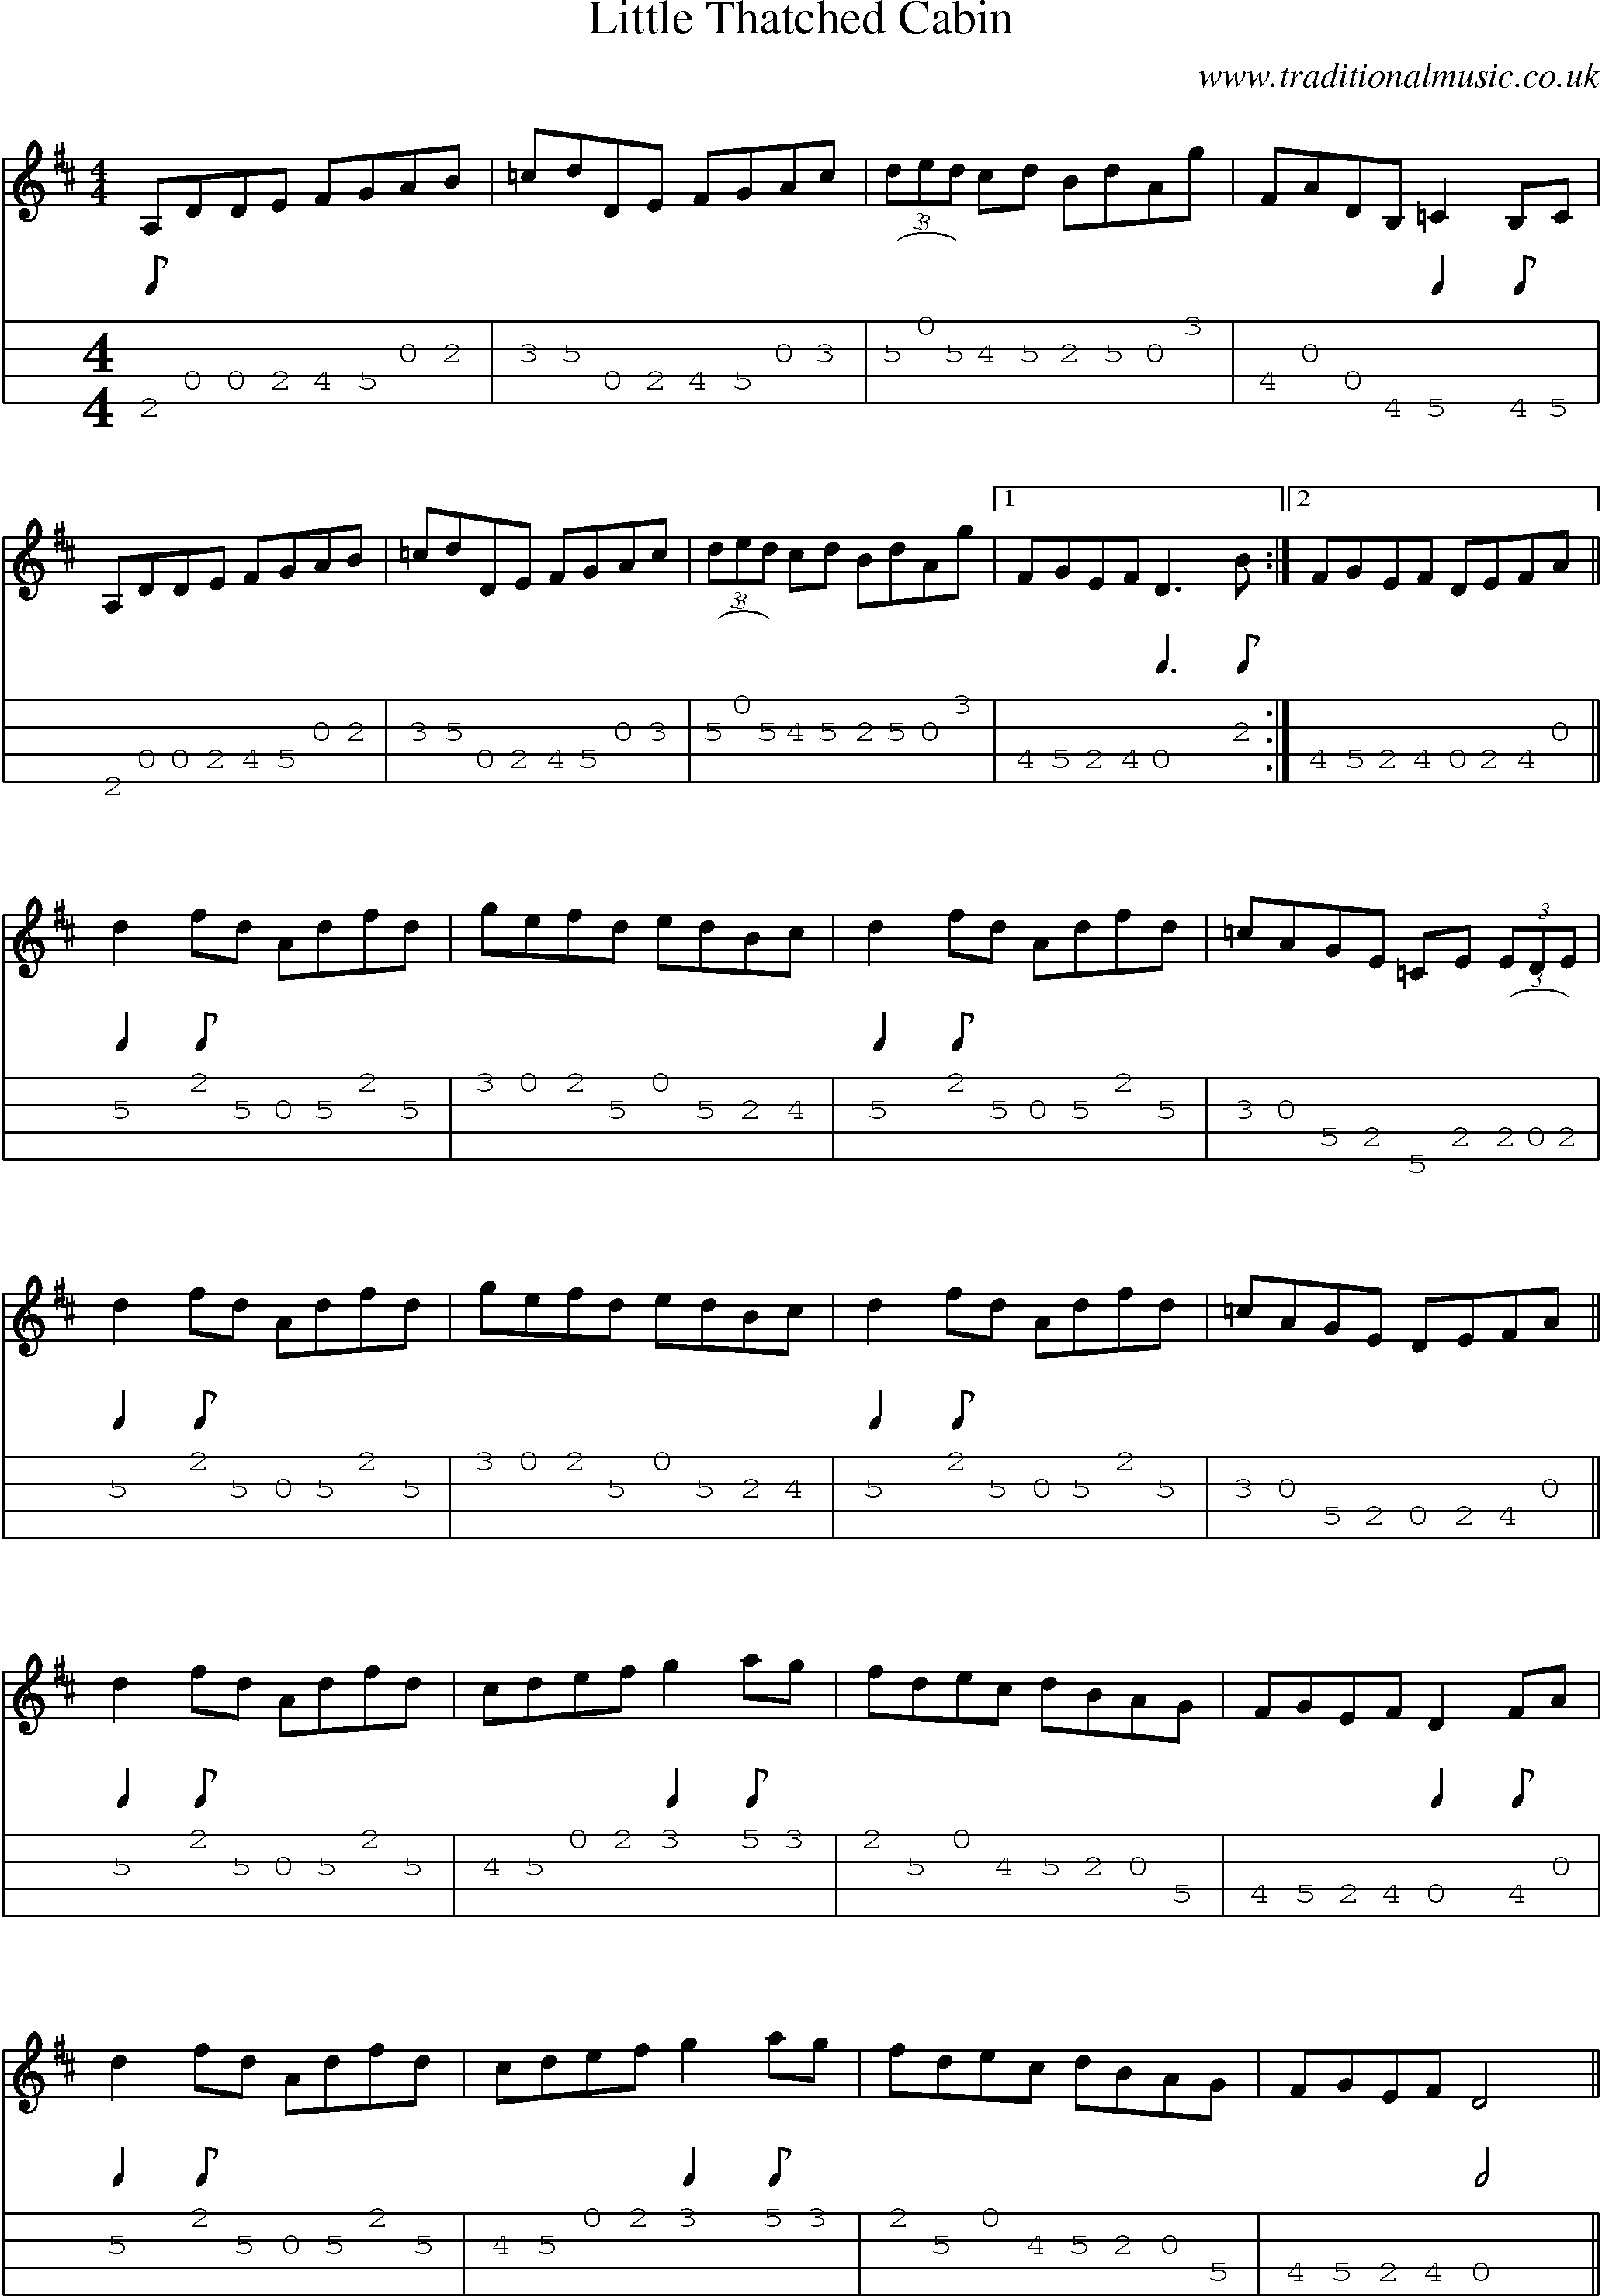 Music Score and Mandolin Tabs for Little Thatched Cabin